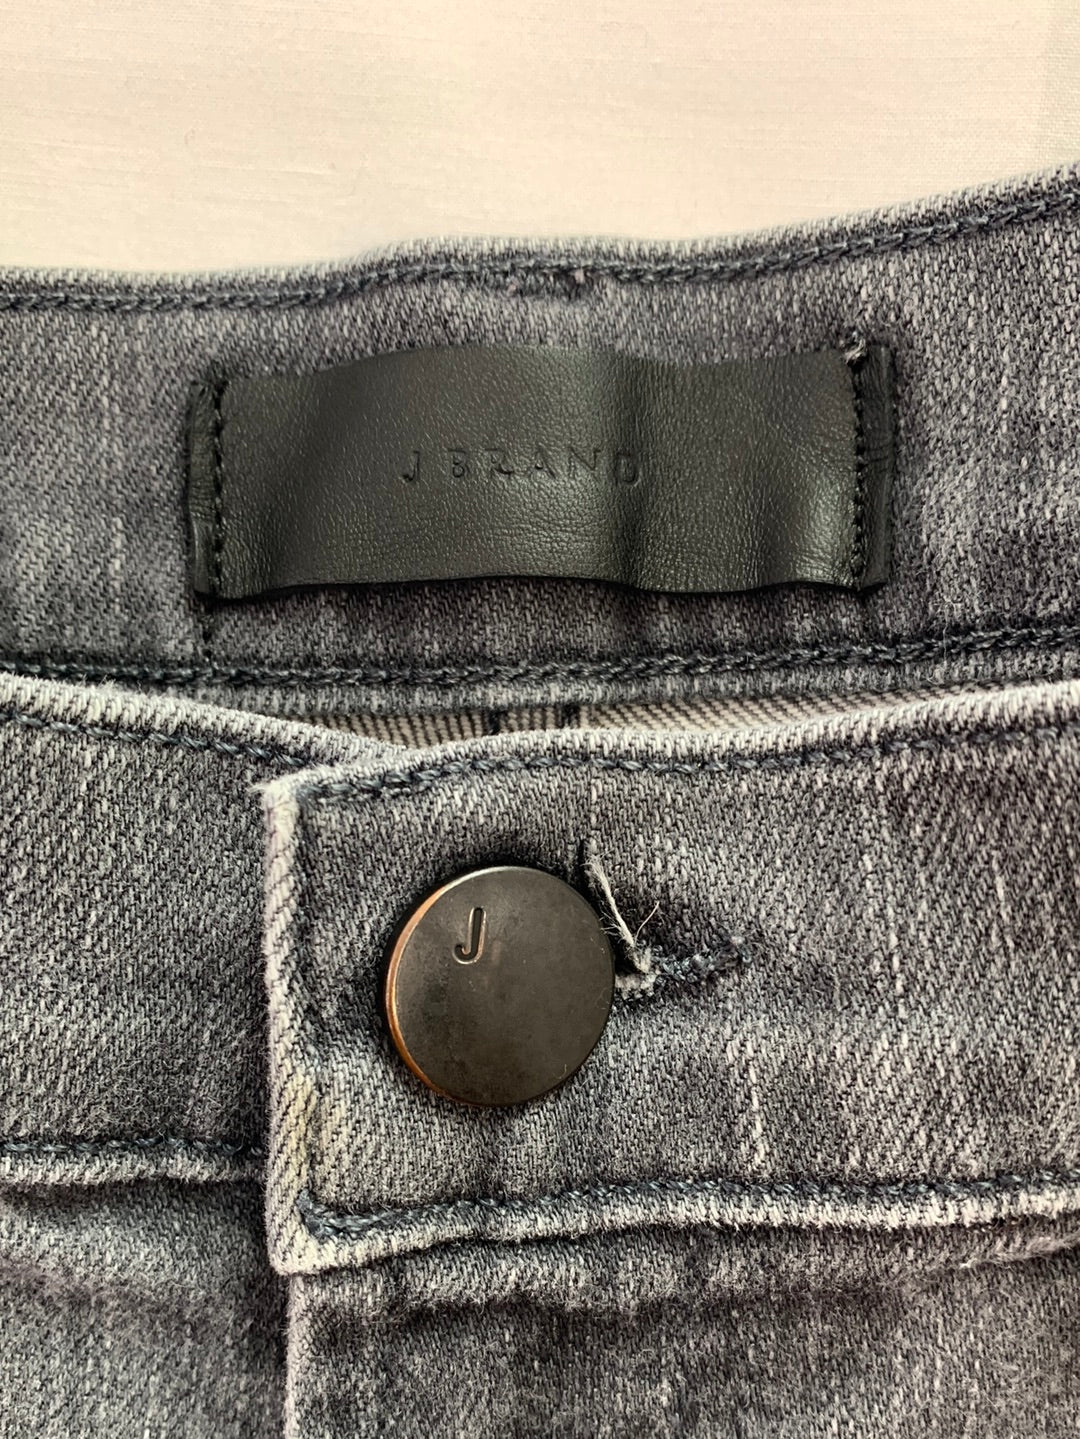 15 Made In USA Jeans Brands (Plus Some Big Names That Don't)